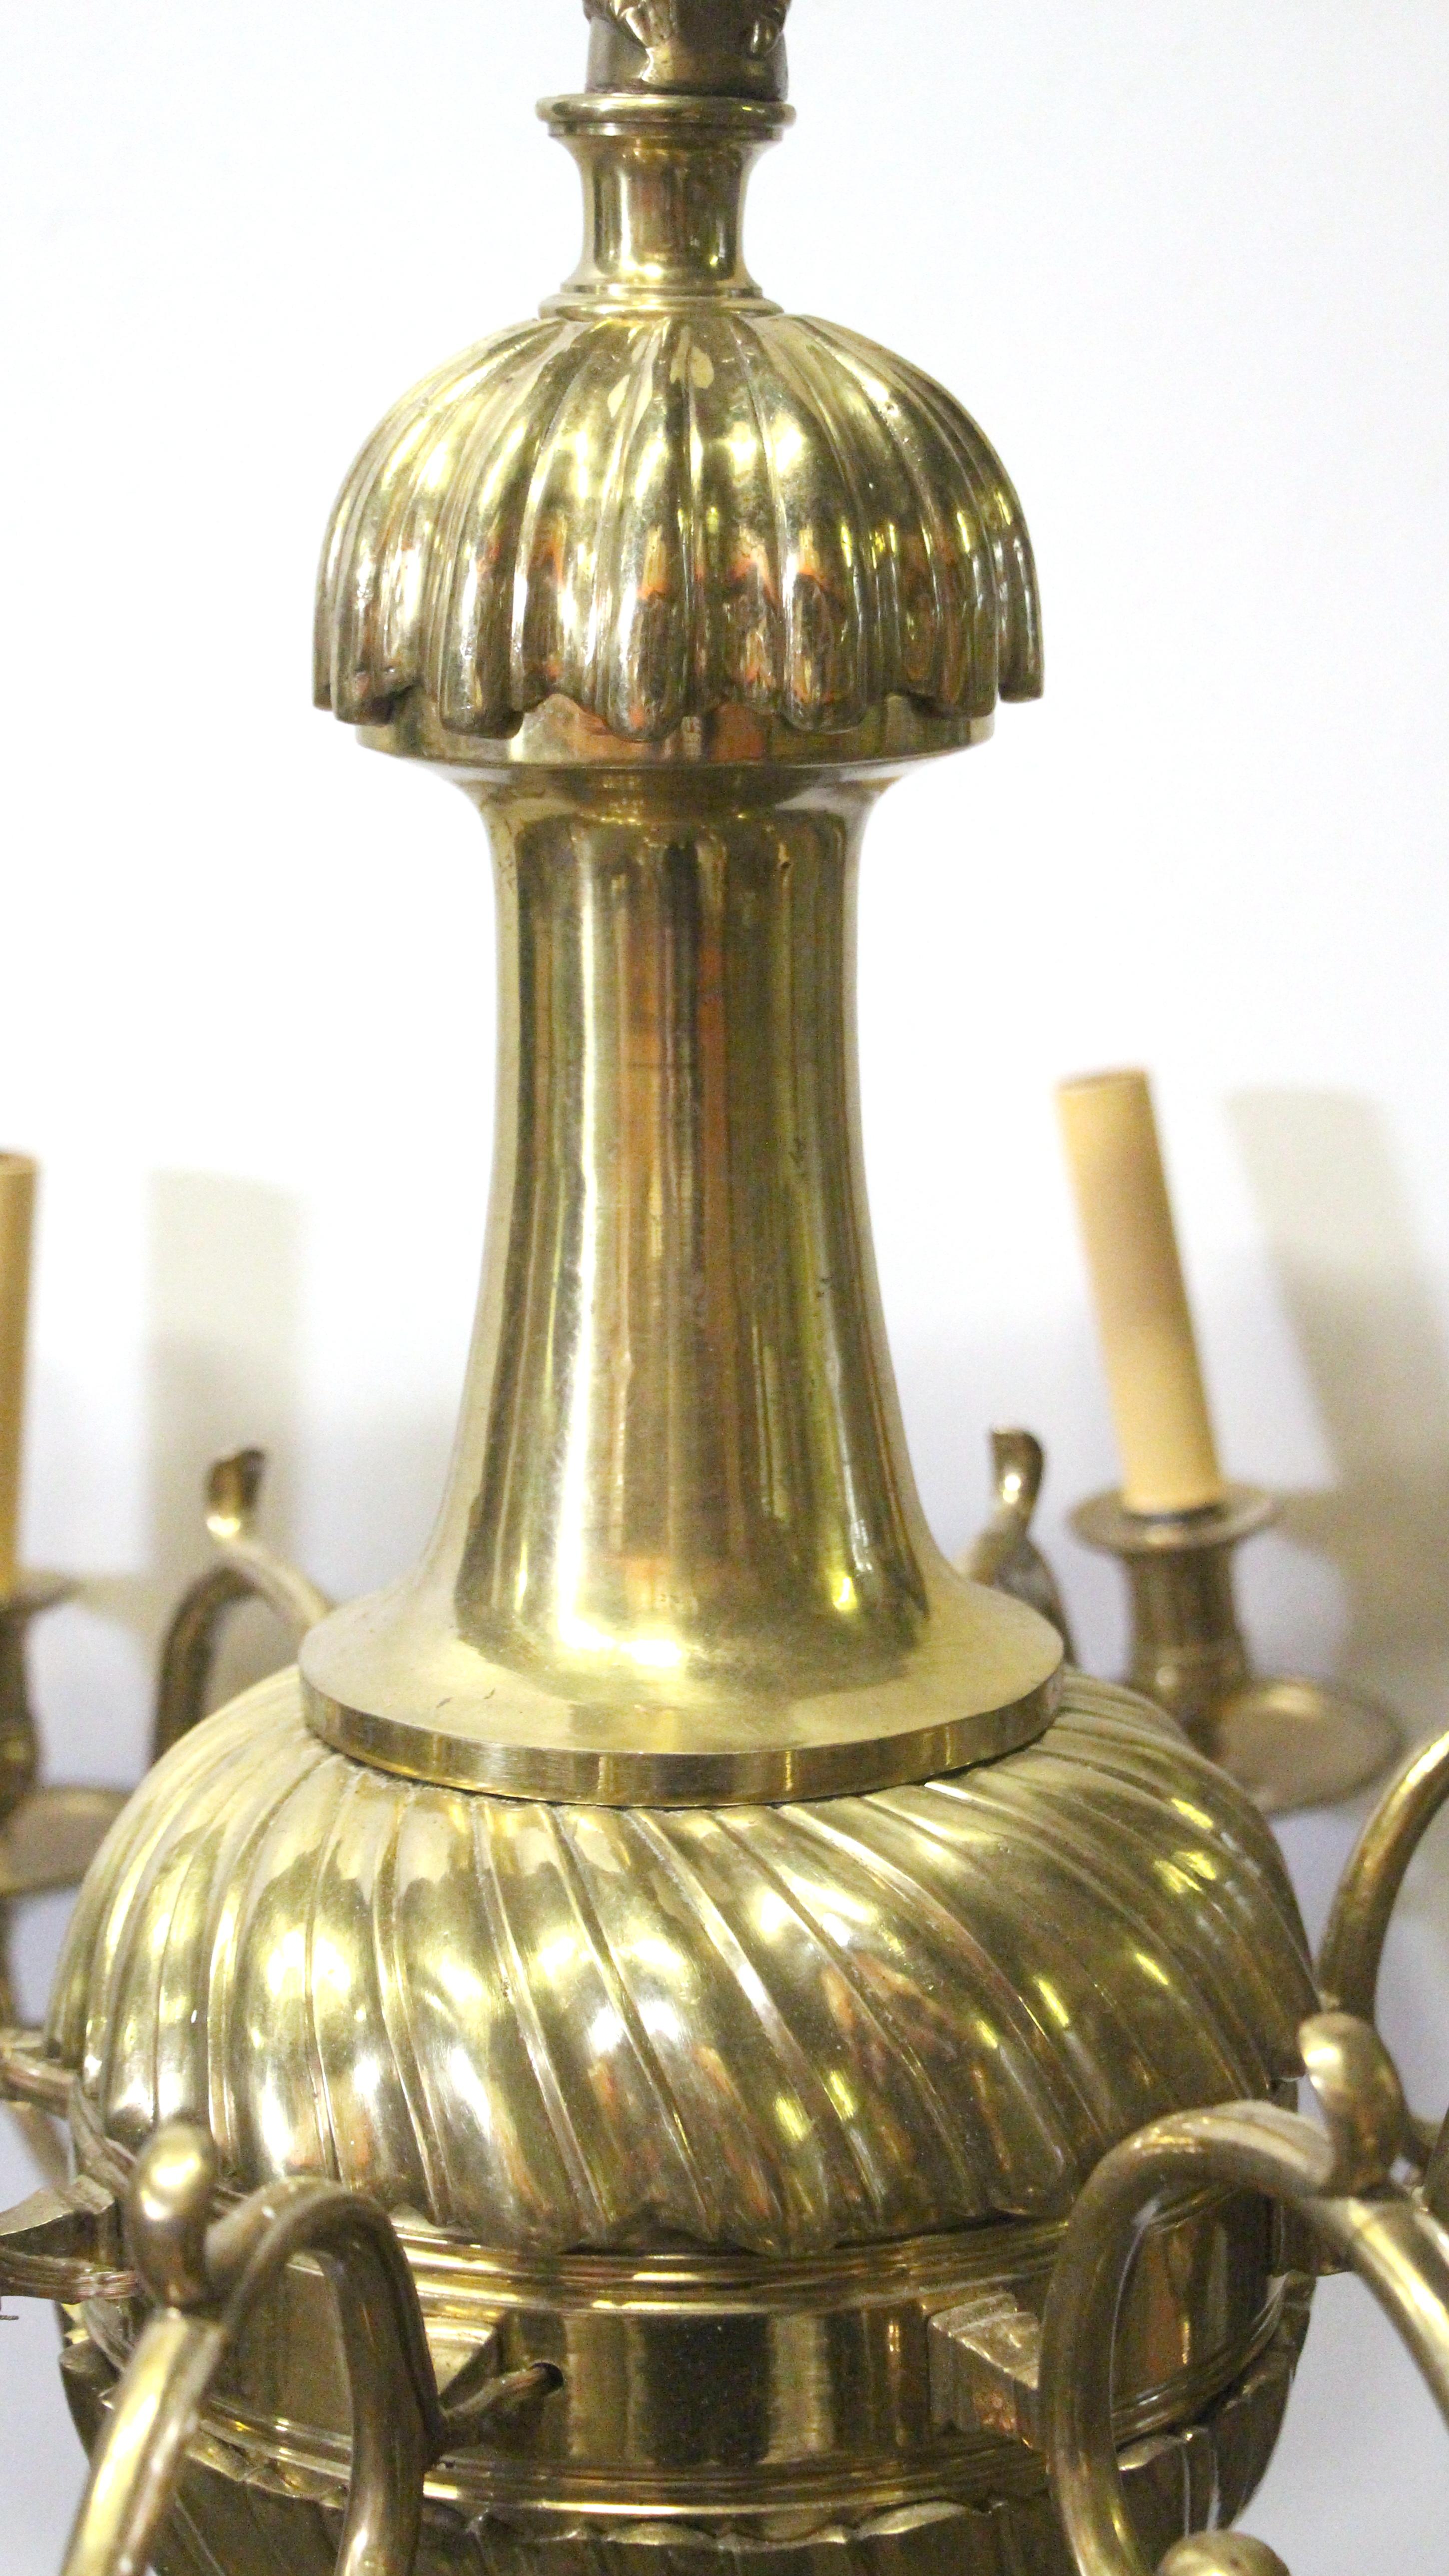 Early 1900s Brass 8-Arm Chandelier from NYC Stock Exchange w/ Eagle Finial 5